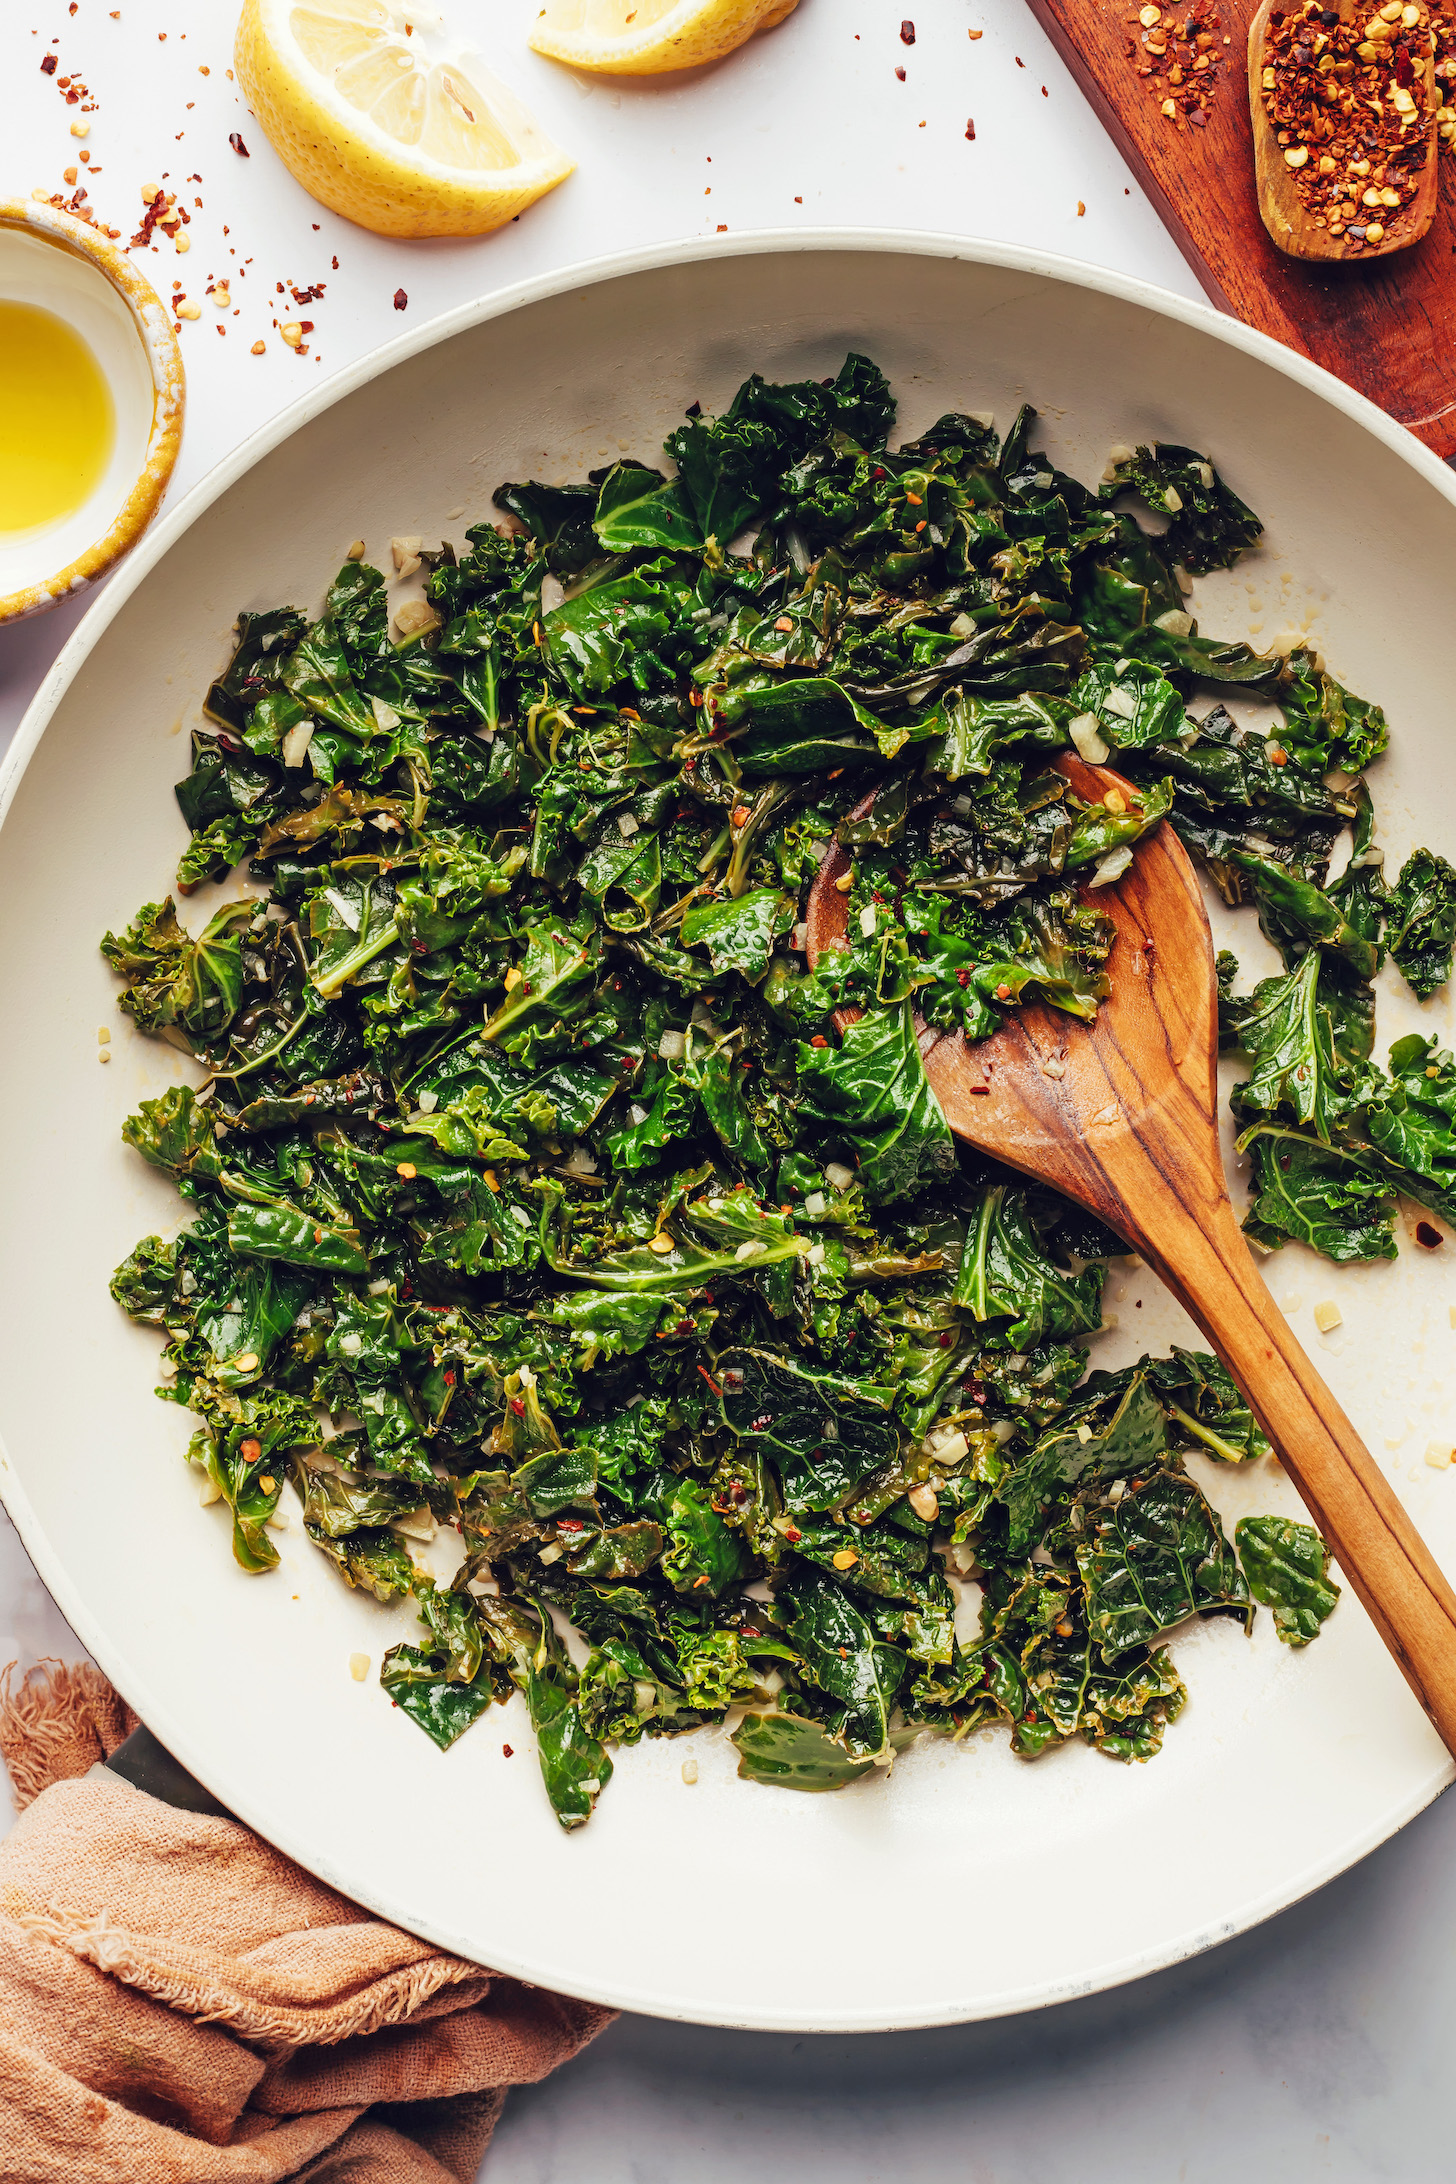 Red pepper flakes, lemon wedges, and olive oil around a pan of sautéed kale